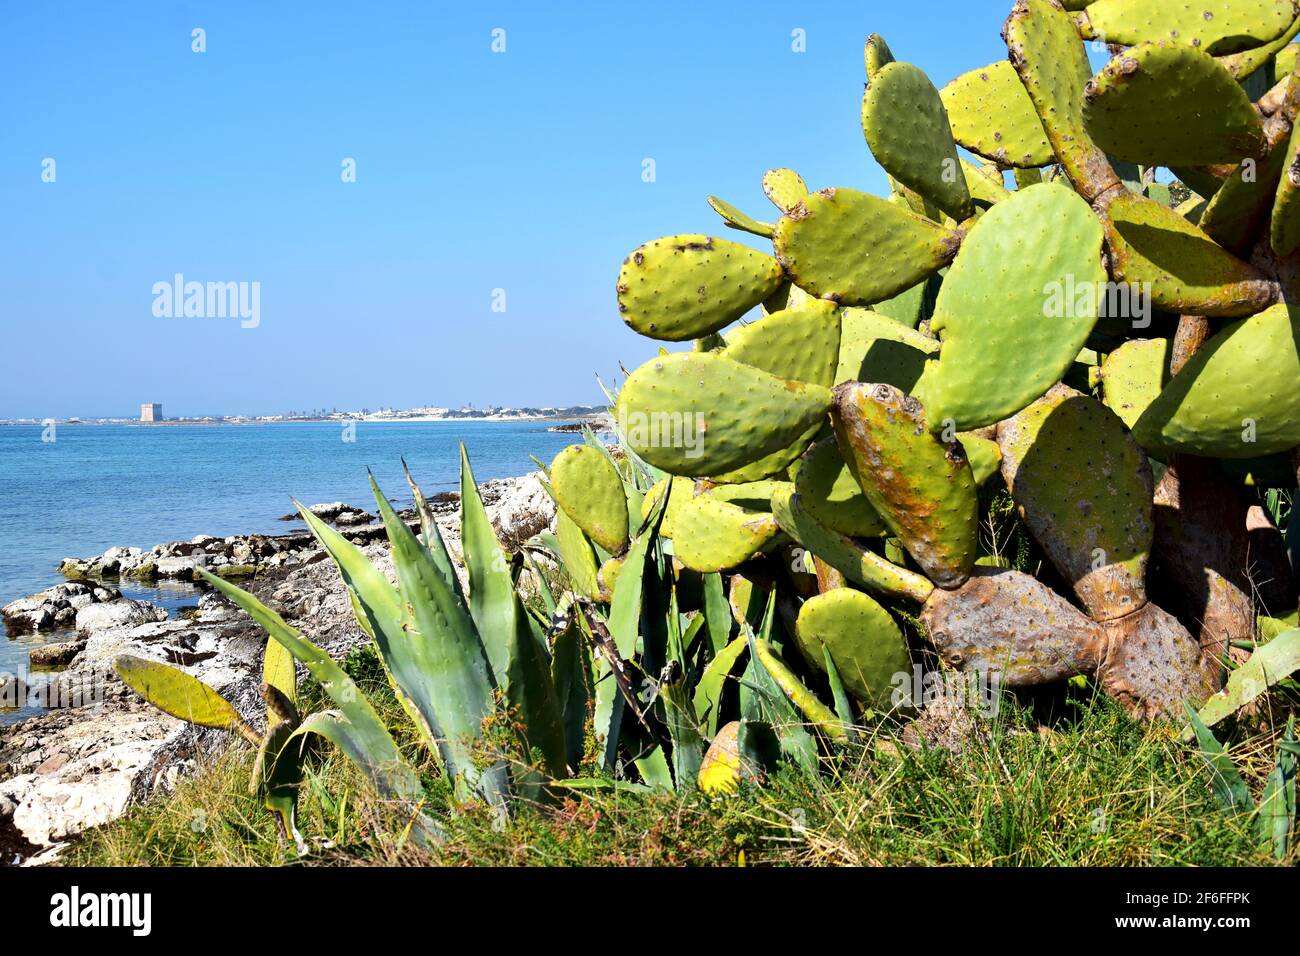 Cactus plant by the sea Stock Photo